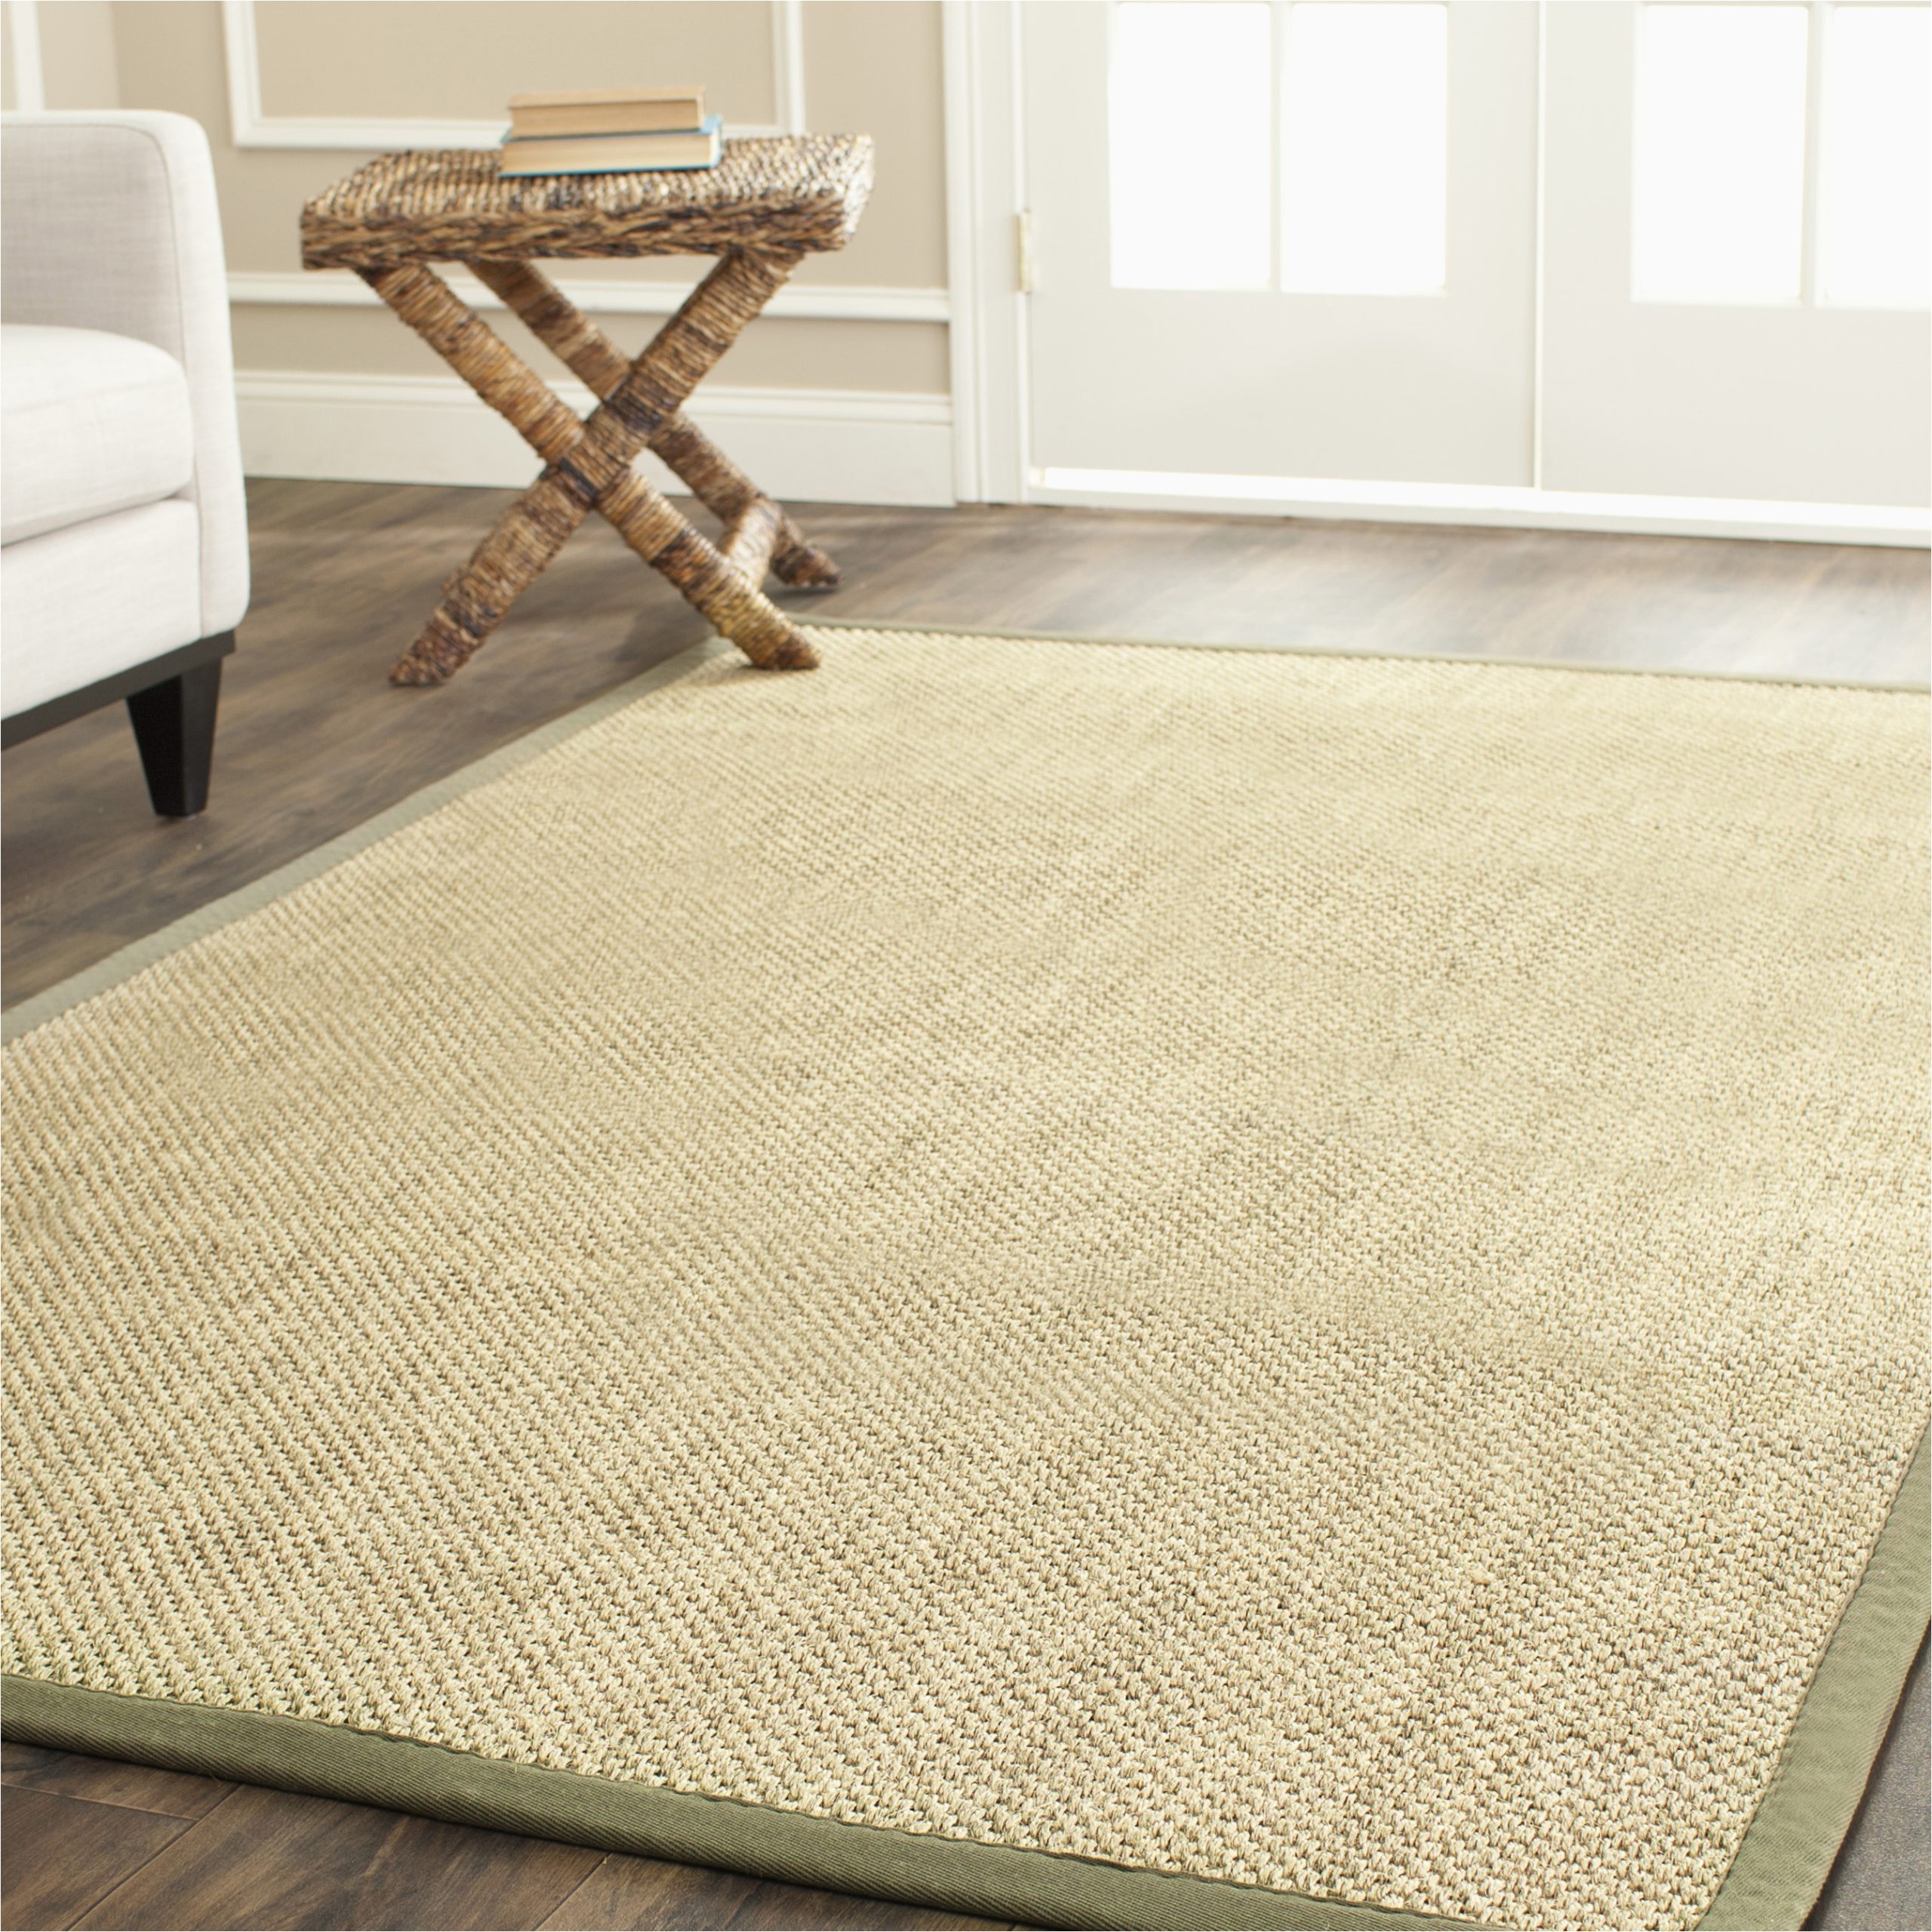 Sisal area Rugs with Borders Safavieh Natural Fiber Juniper Border Sisal area Rug, Natural/green, 6′ X 9′